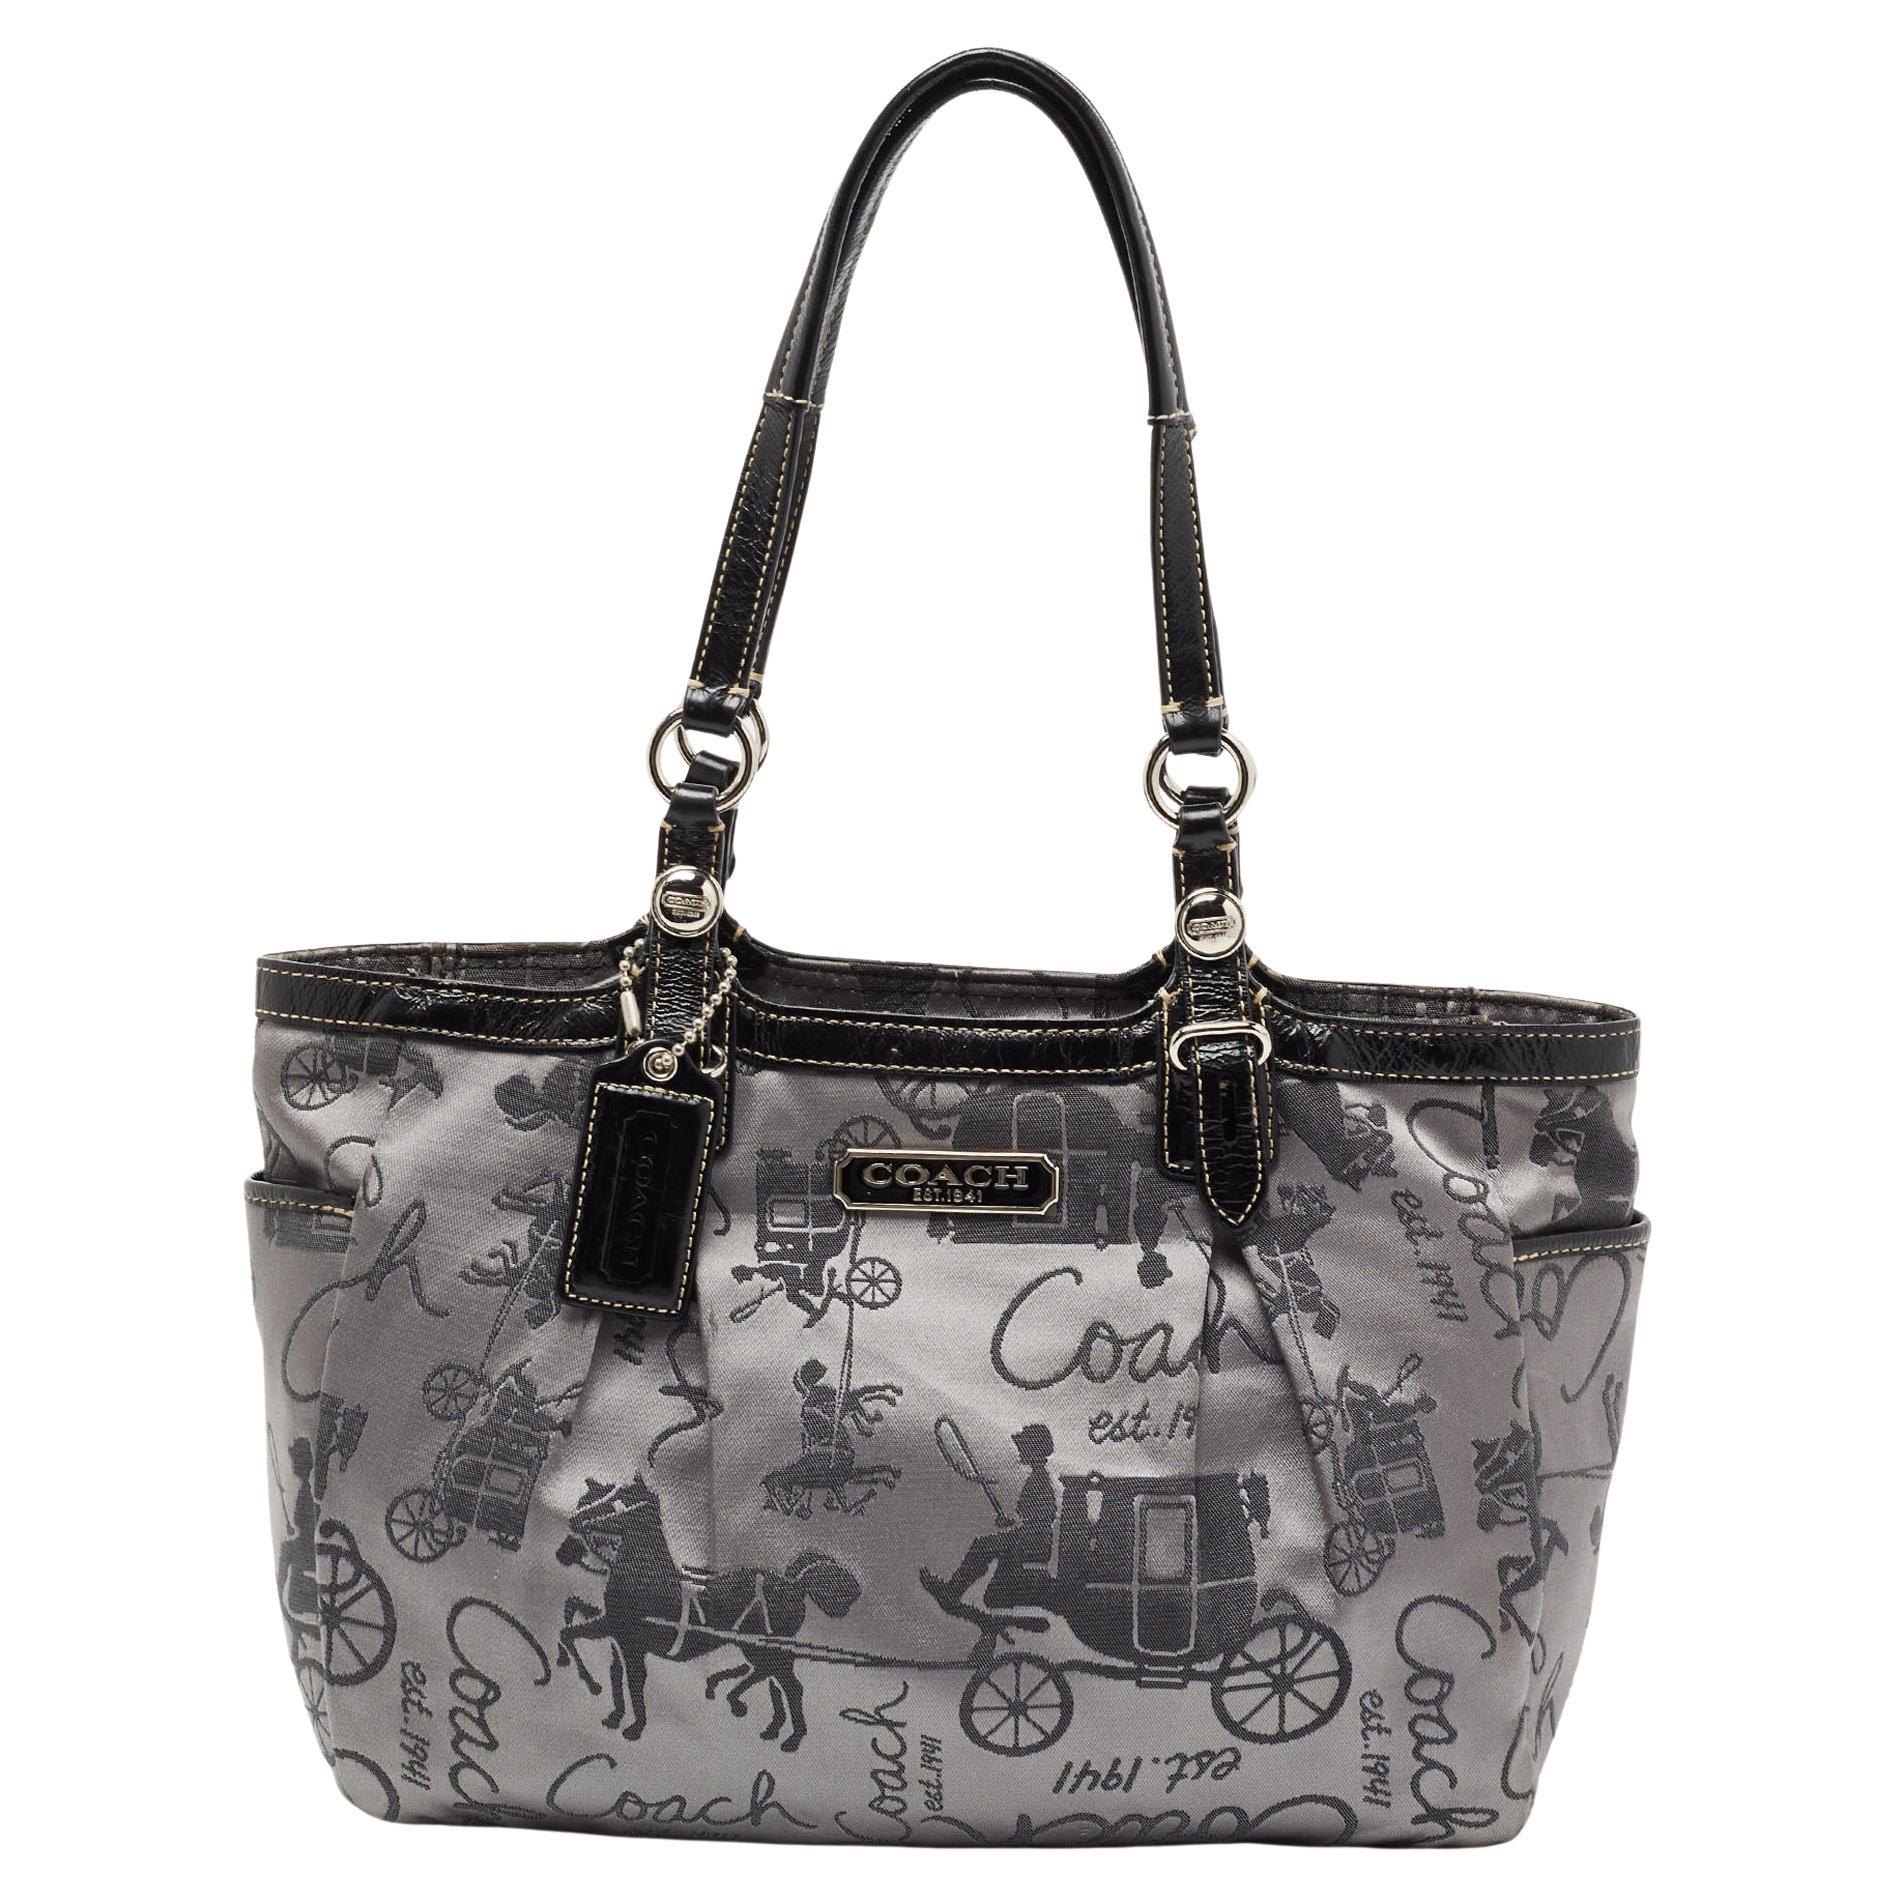 Coach Grey/Black Printed Fabric and Leather Tote